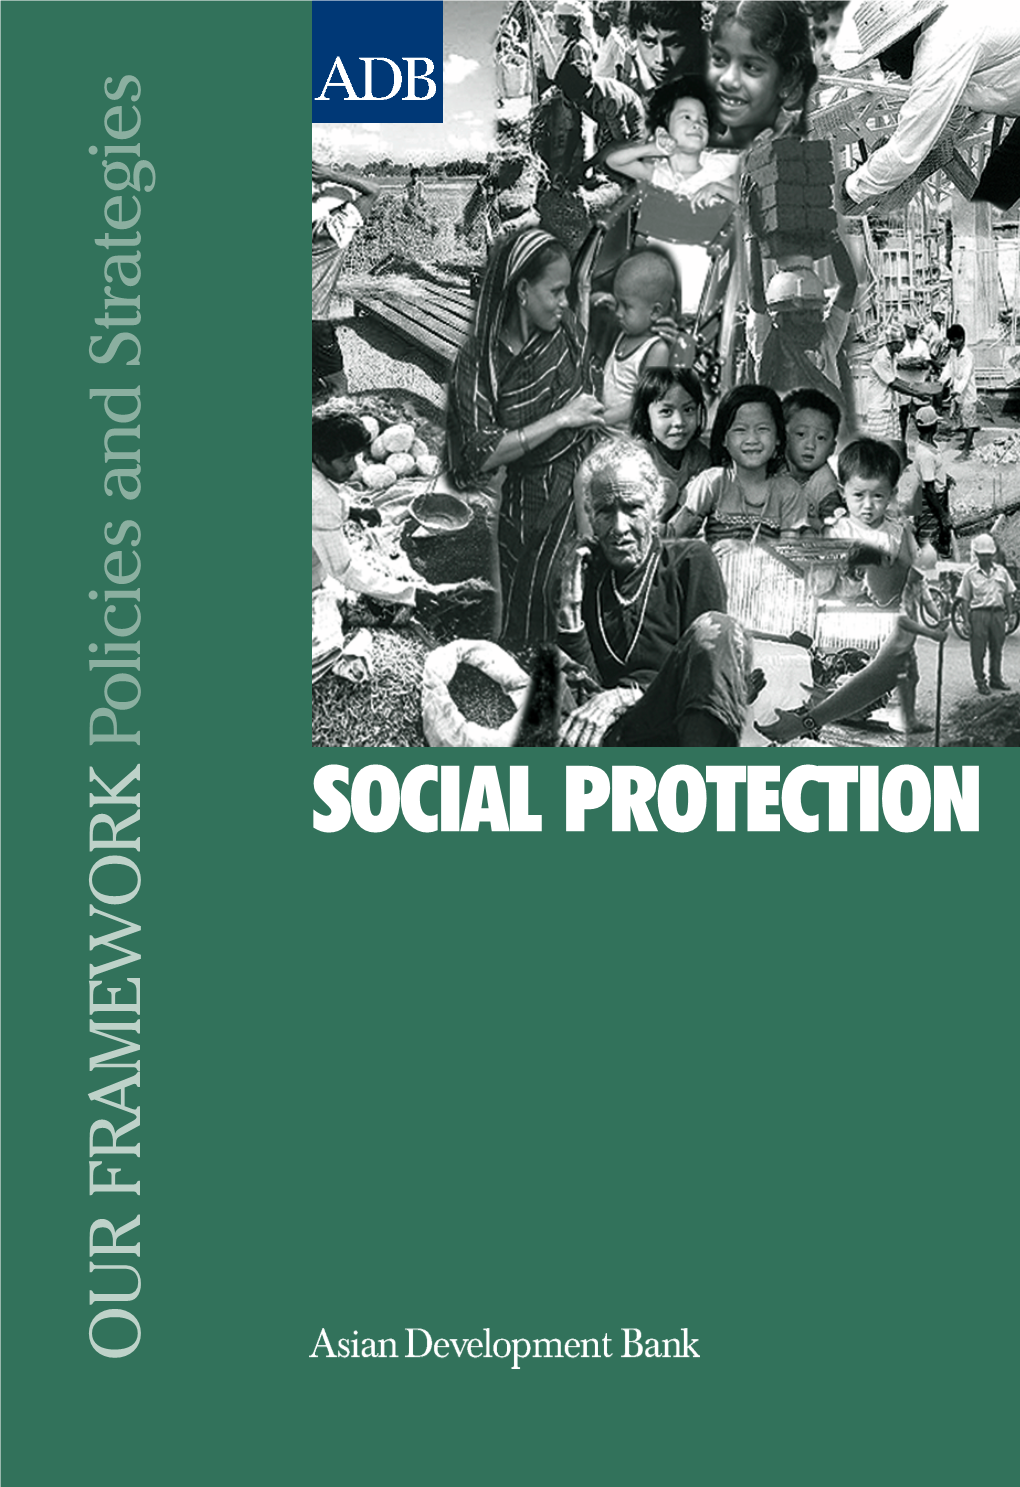 SOCIAL PROTECTION Policies and Strategies Policies SOCIAL PROTECTION OUR FRAMEWORK